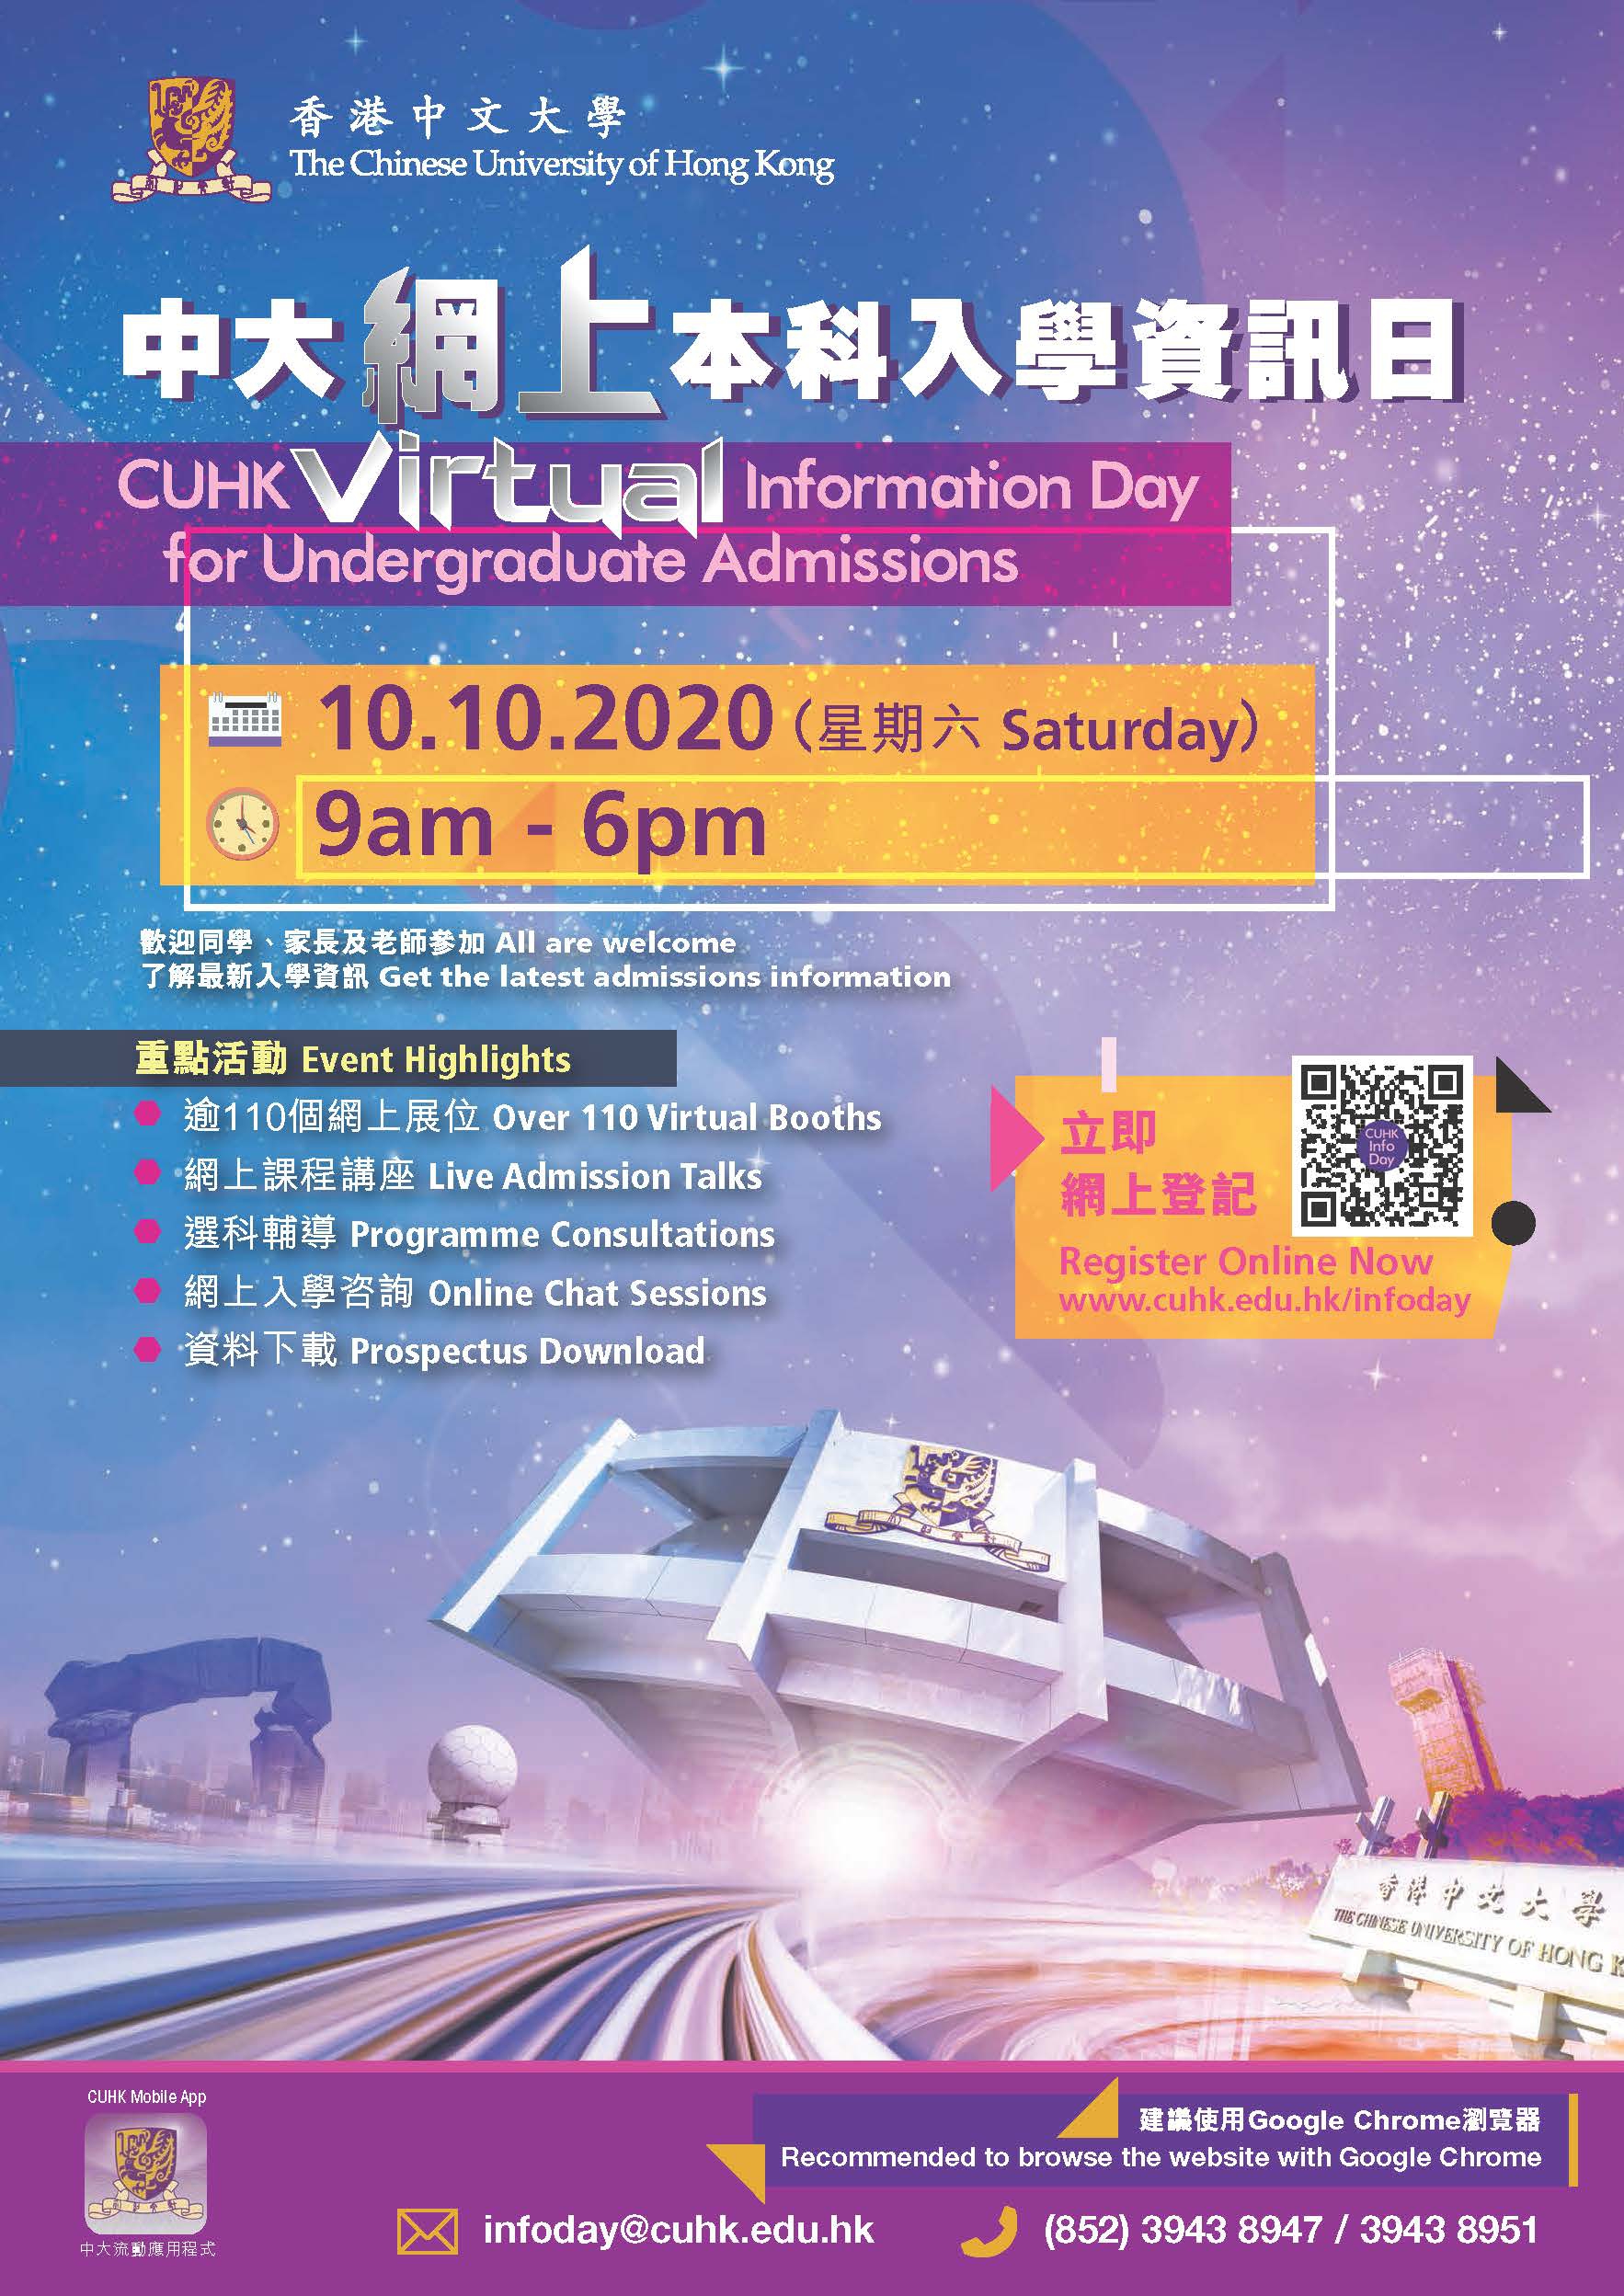 CUHK Virtual Information Day for Undergraduate Admissions